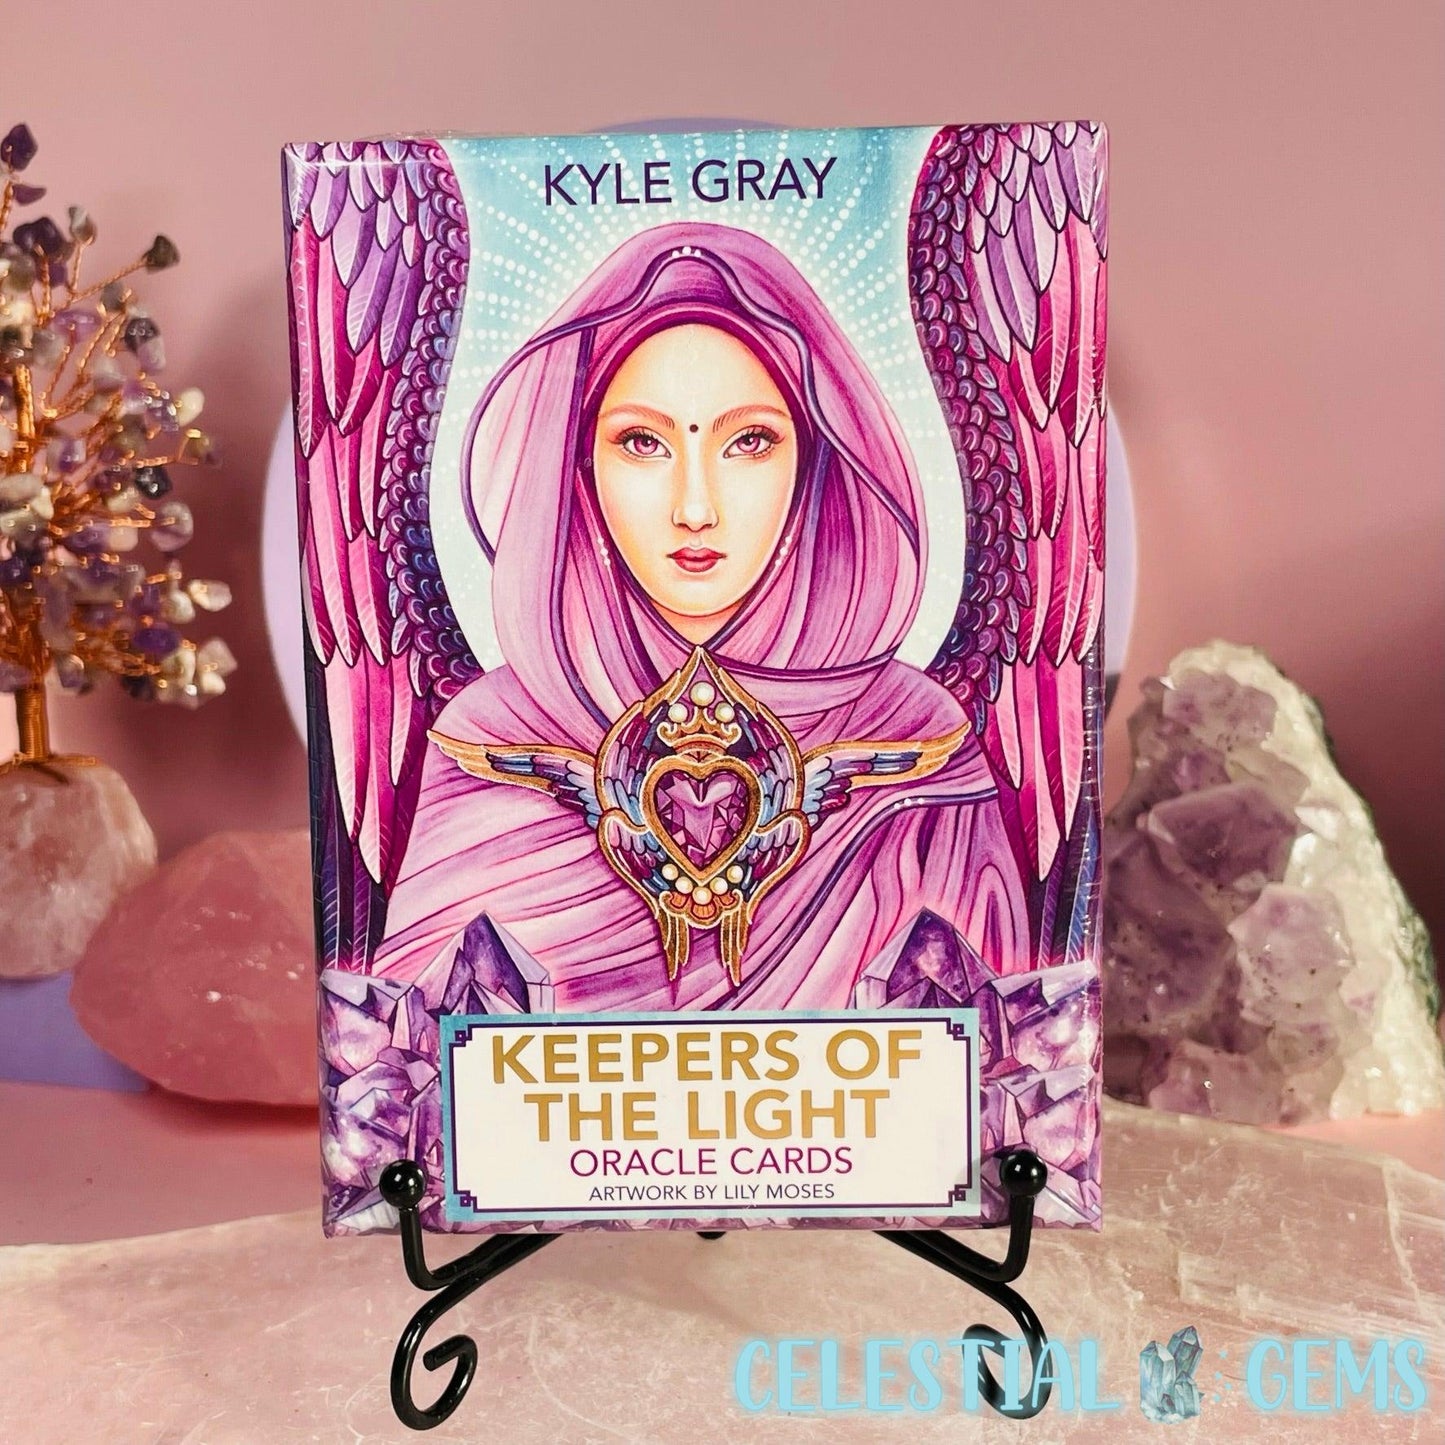 Keepers of The Light Oracle Card Deck by Kyle Gray